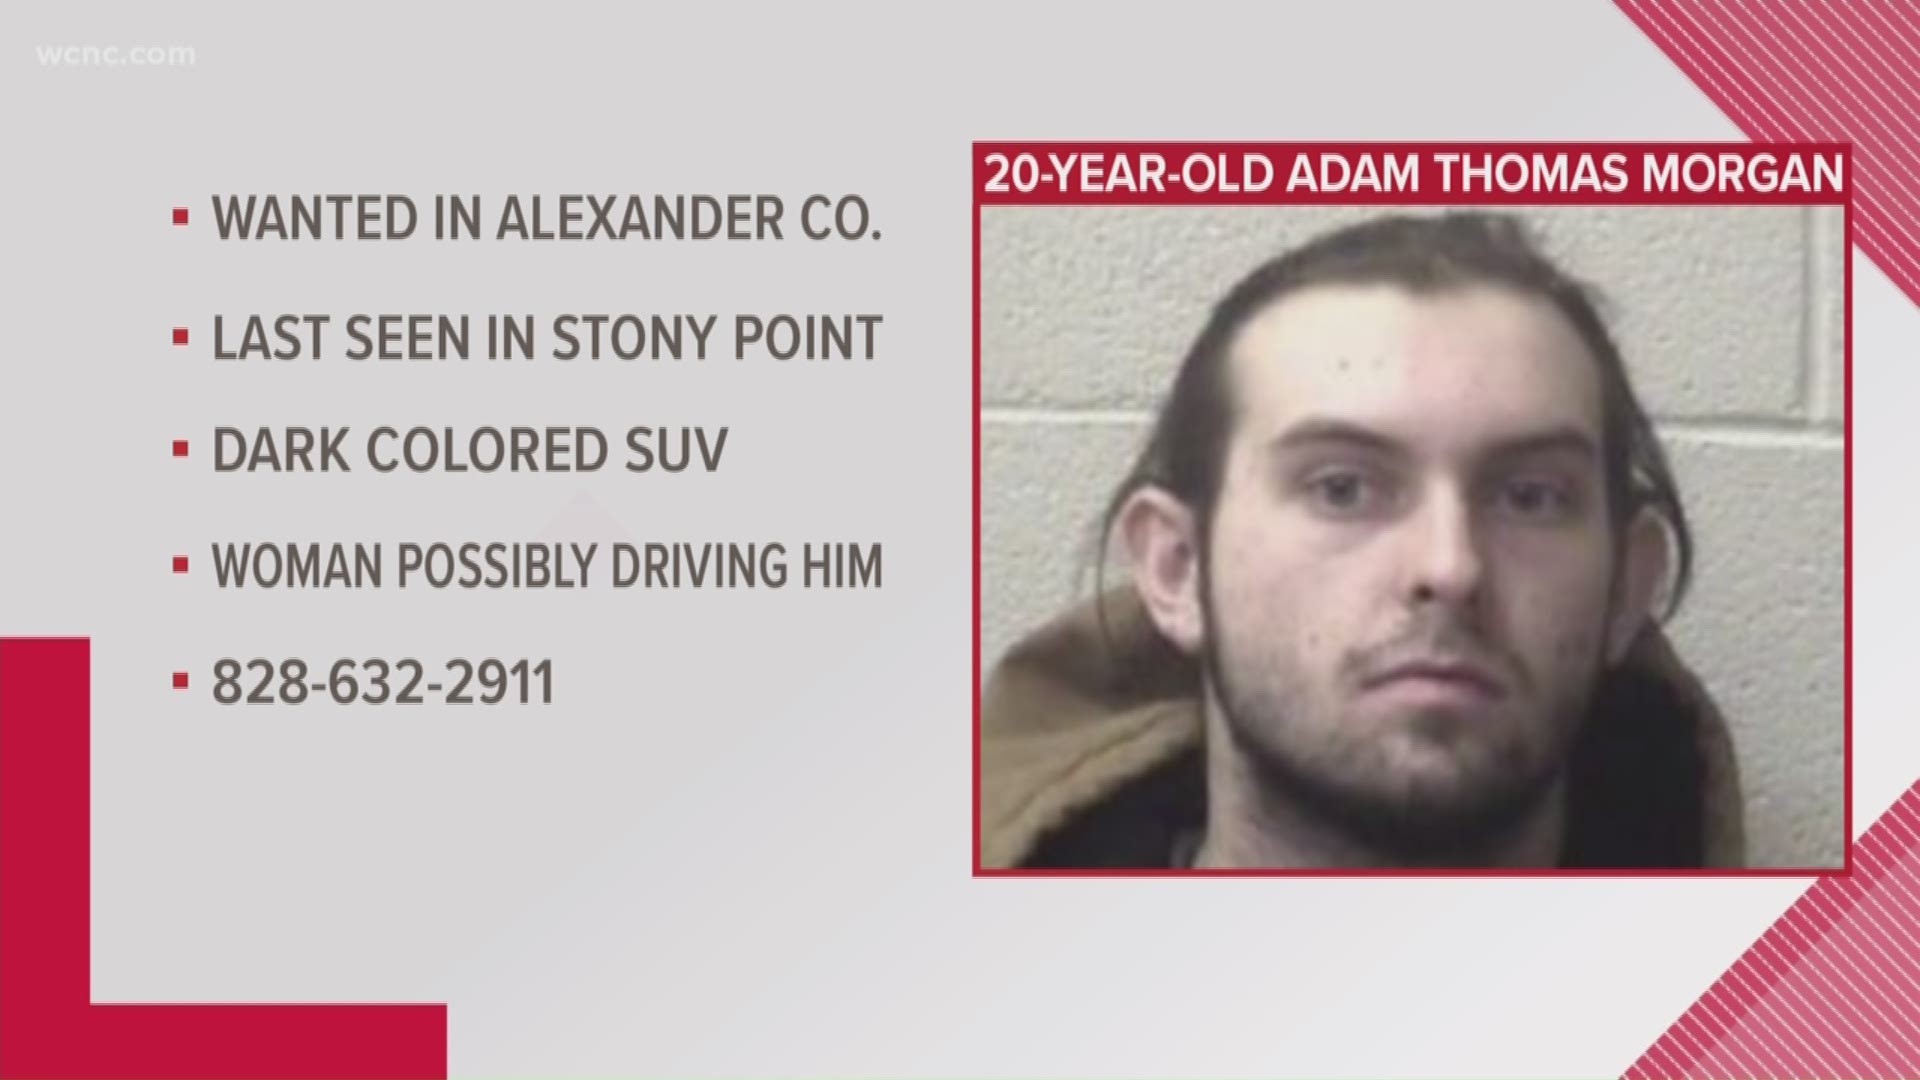 He was last seen Friday around 4 p.m. on Old Mountain Road, Stony Point headed toward Alexander County near the Iredell and Alexander County line.